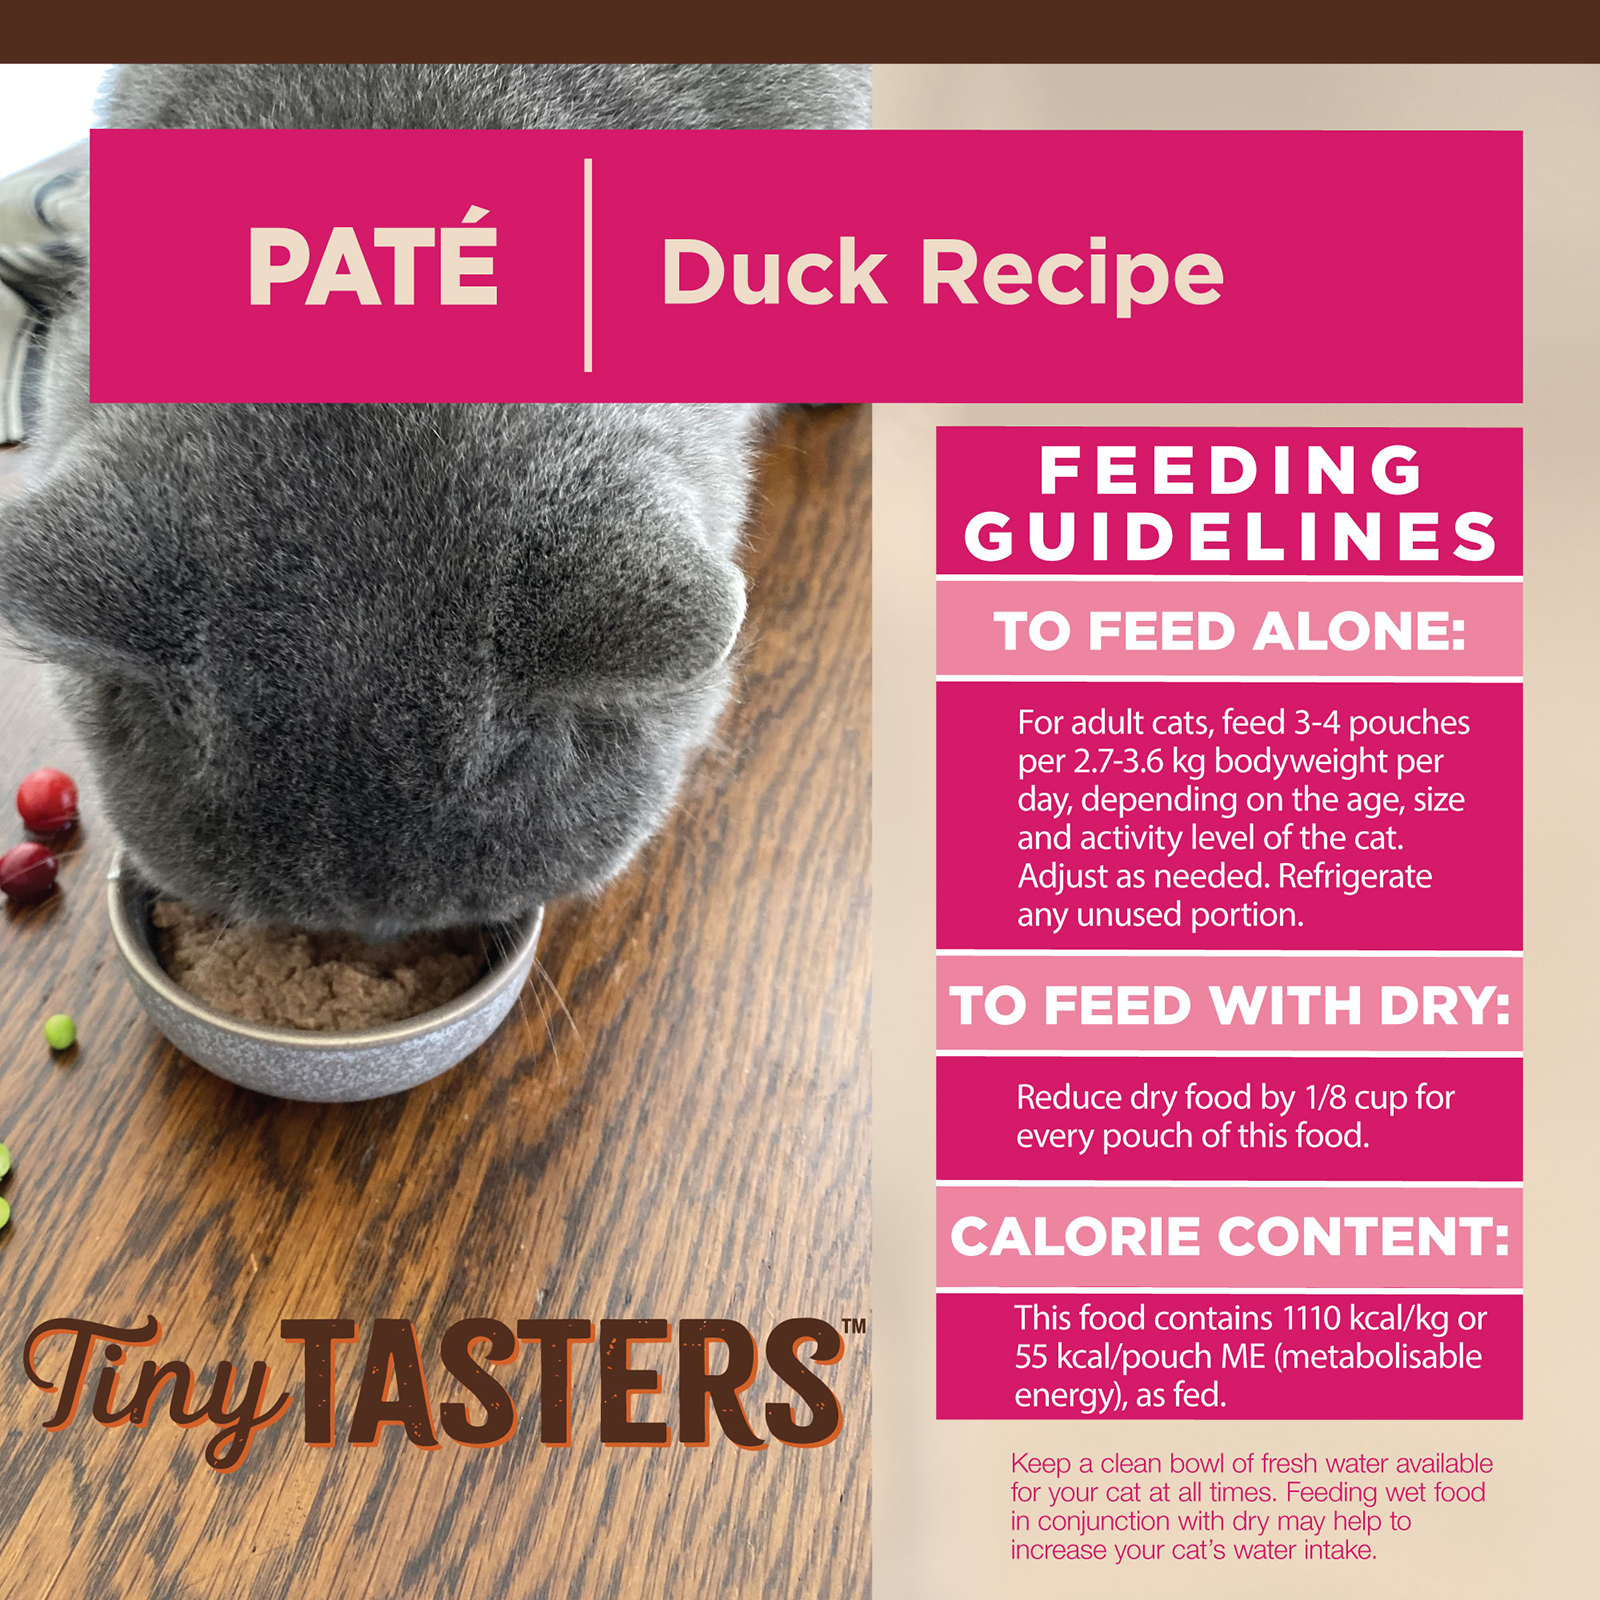 Wellness CORE Tiny Tasters Cat Food Pouch Adult Smooth Pâté Duck